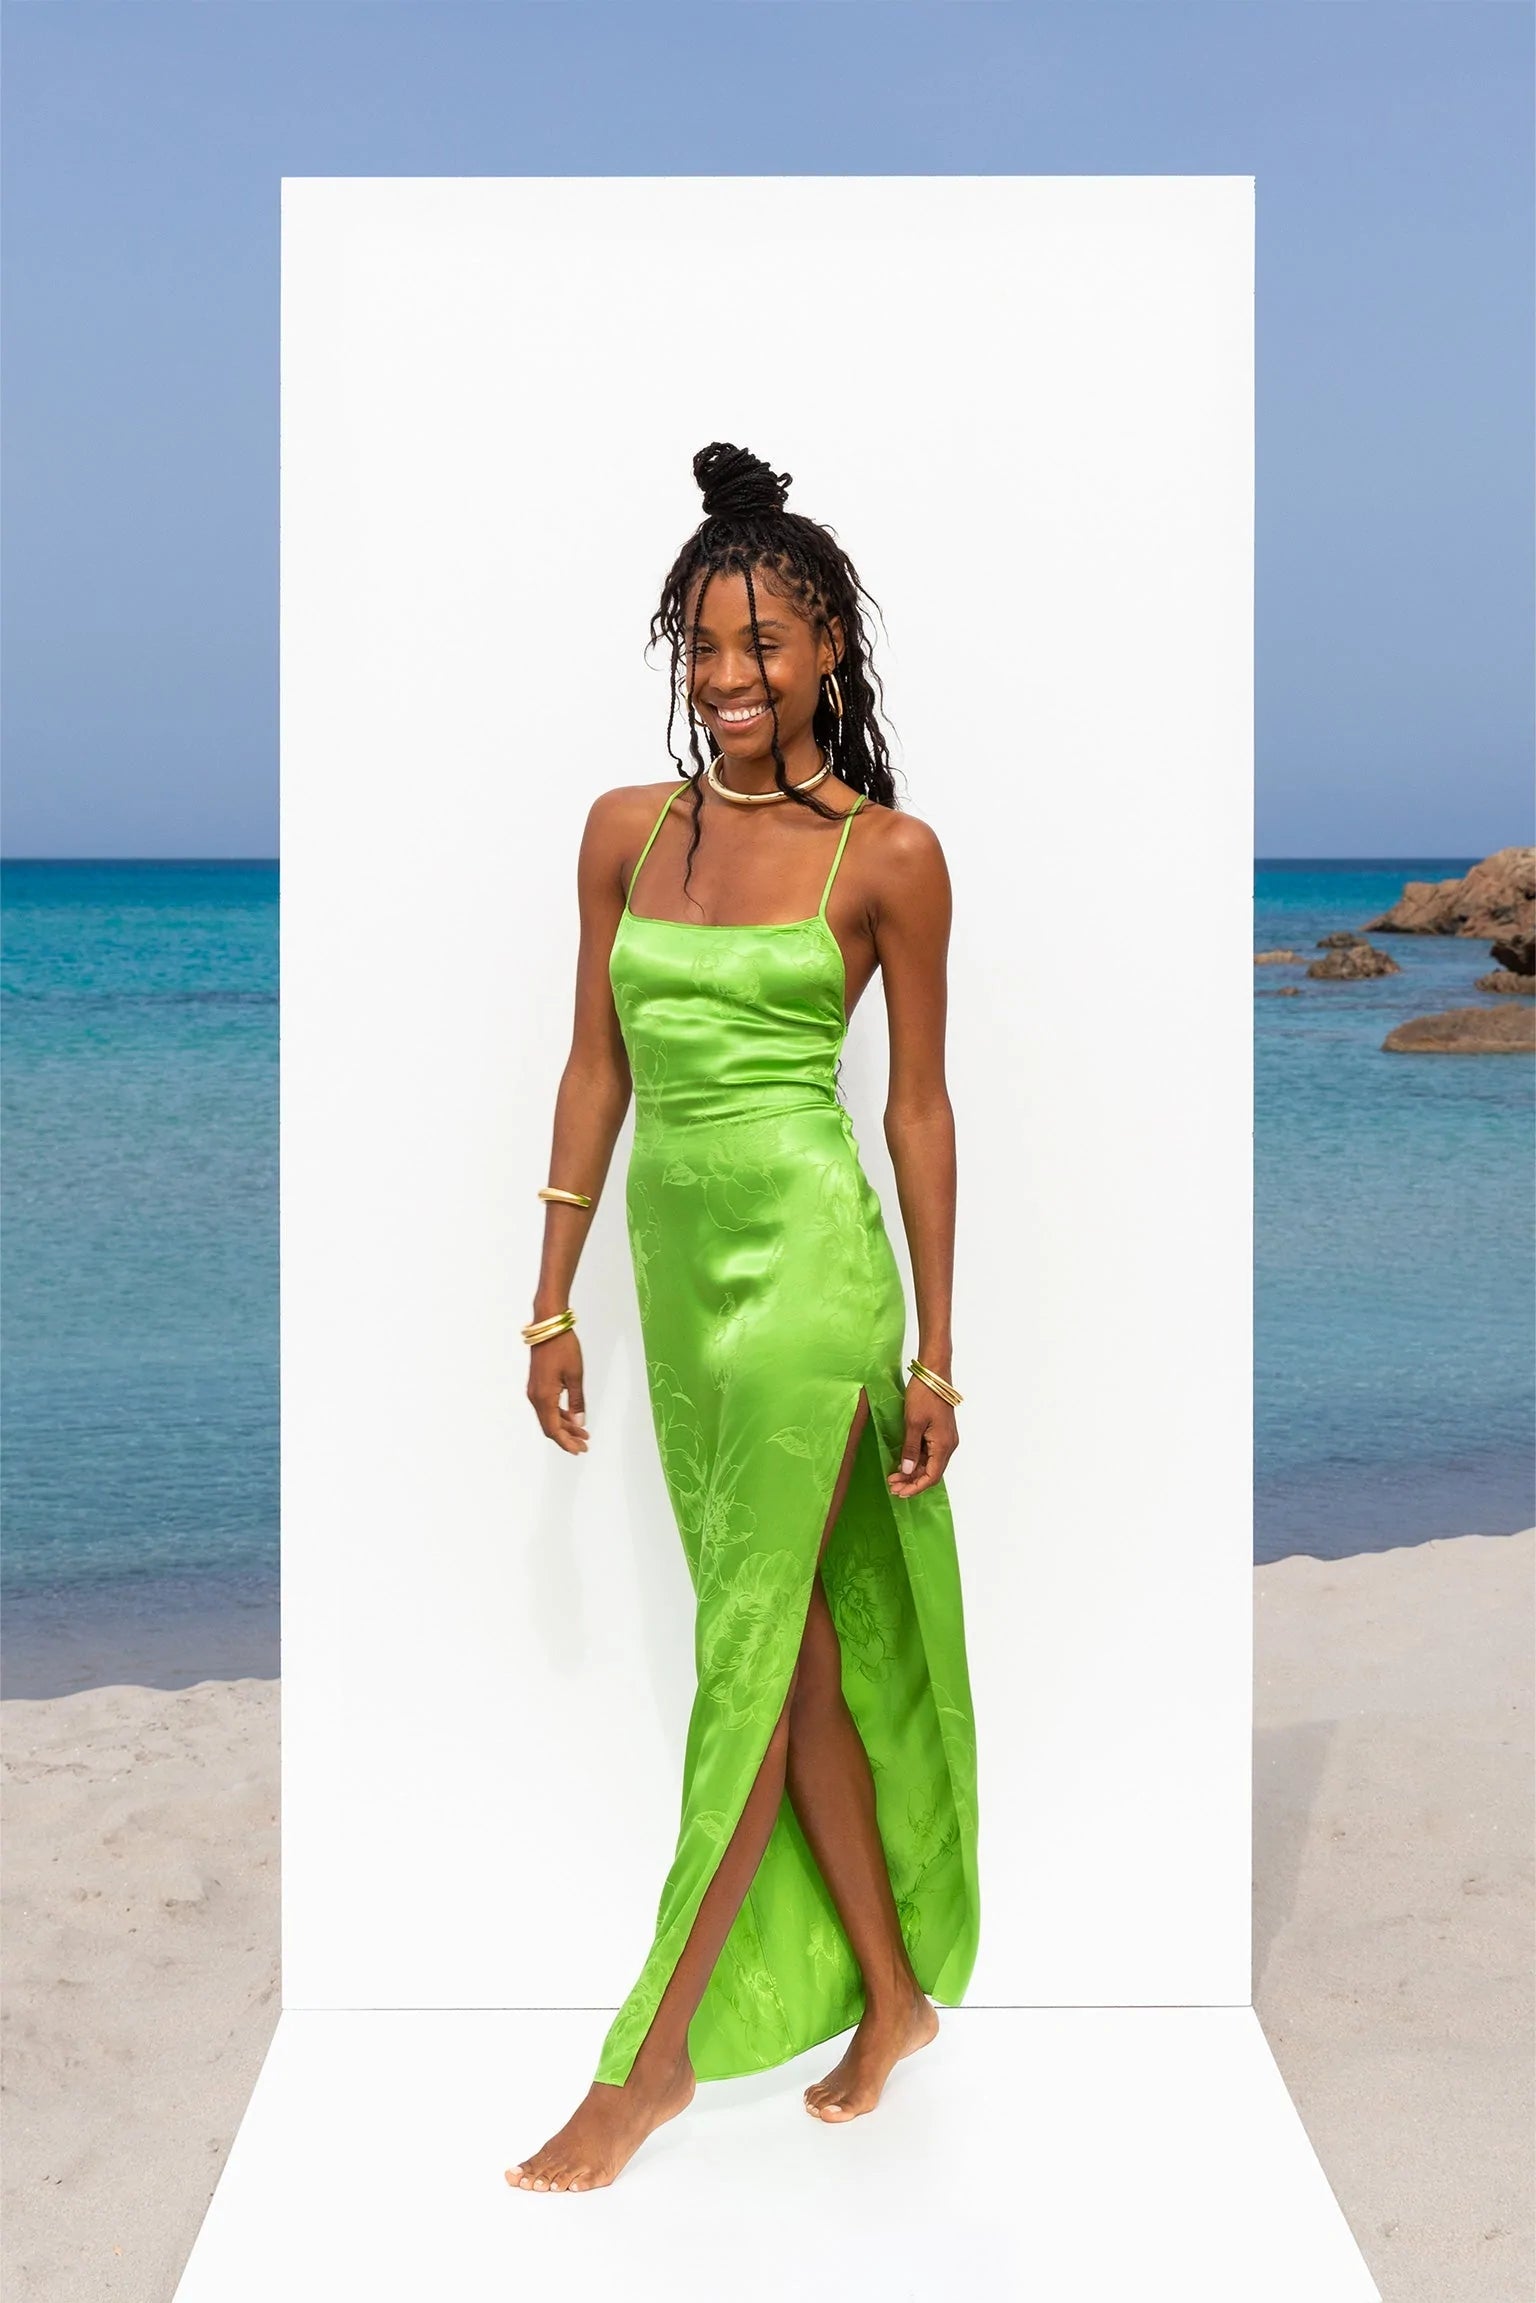 A woman in a lime green dress posing on the beach.